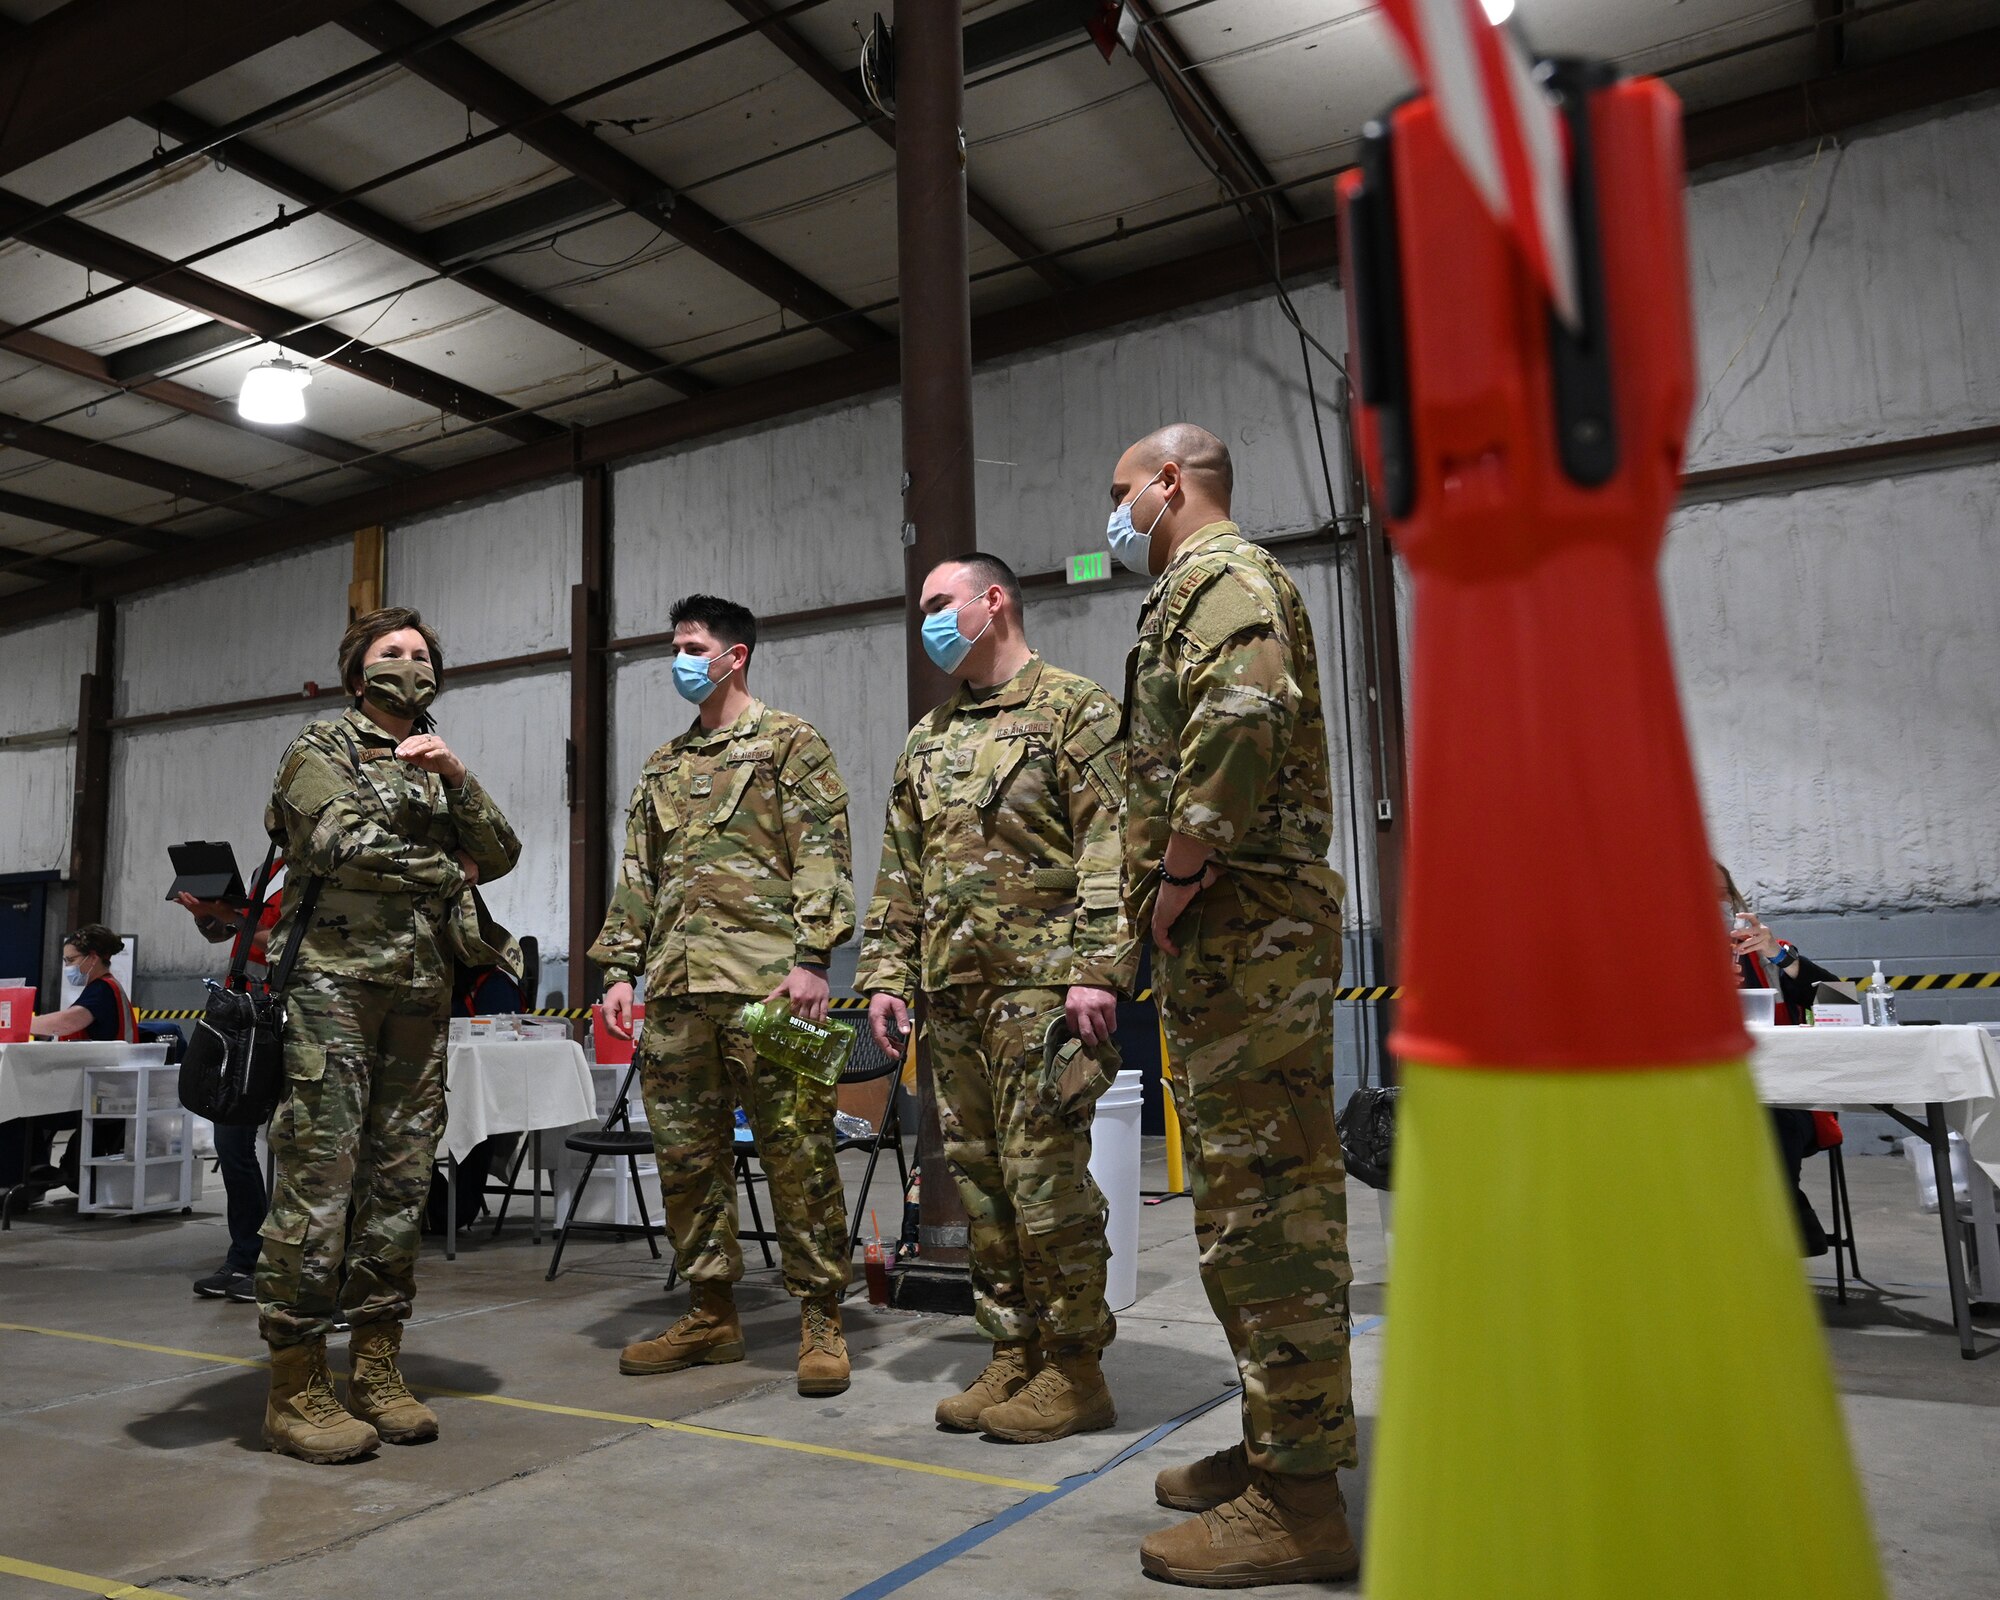 U.S. Air Force Lt. Col. Christine Estacion (left), health services administrator assigned to the 175th Medical Group, speaks with firefighters assigned to the 175th Civil Engineer Squadron, at the COVID-19 mass vaccination site at the Maryland State Fairgrounds in Timonium, Md., April 15, 2021.